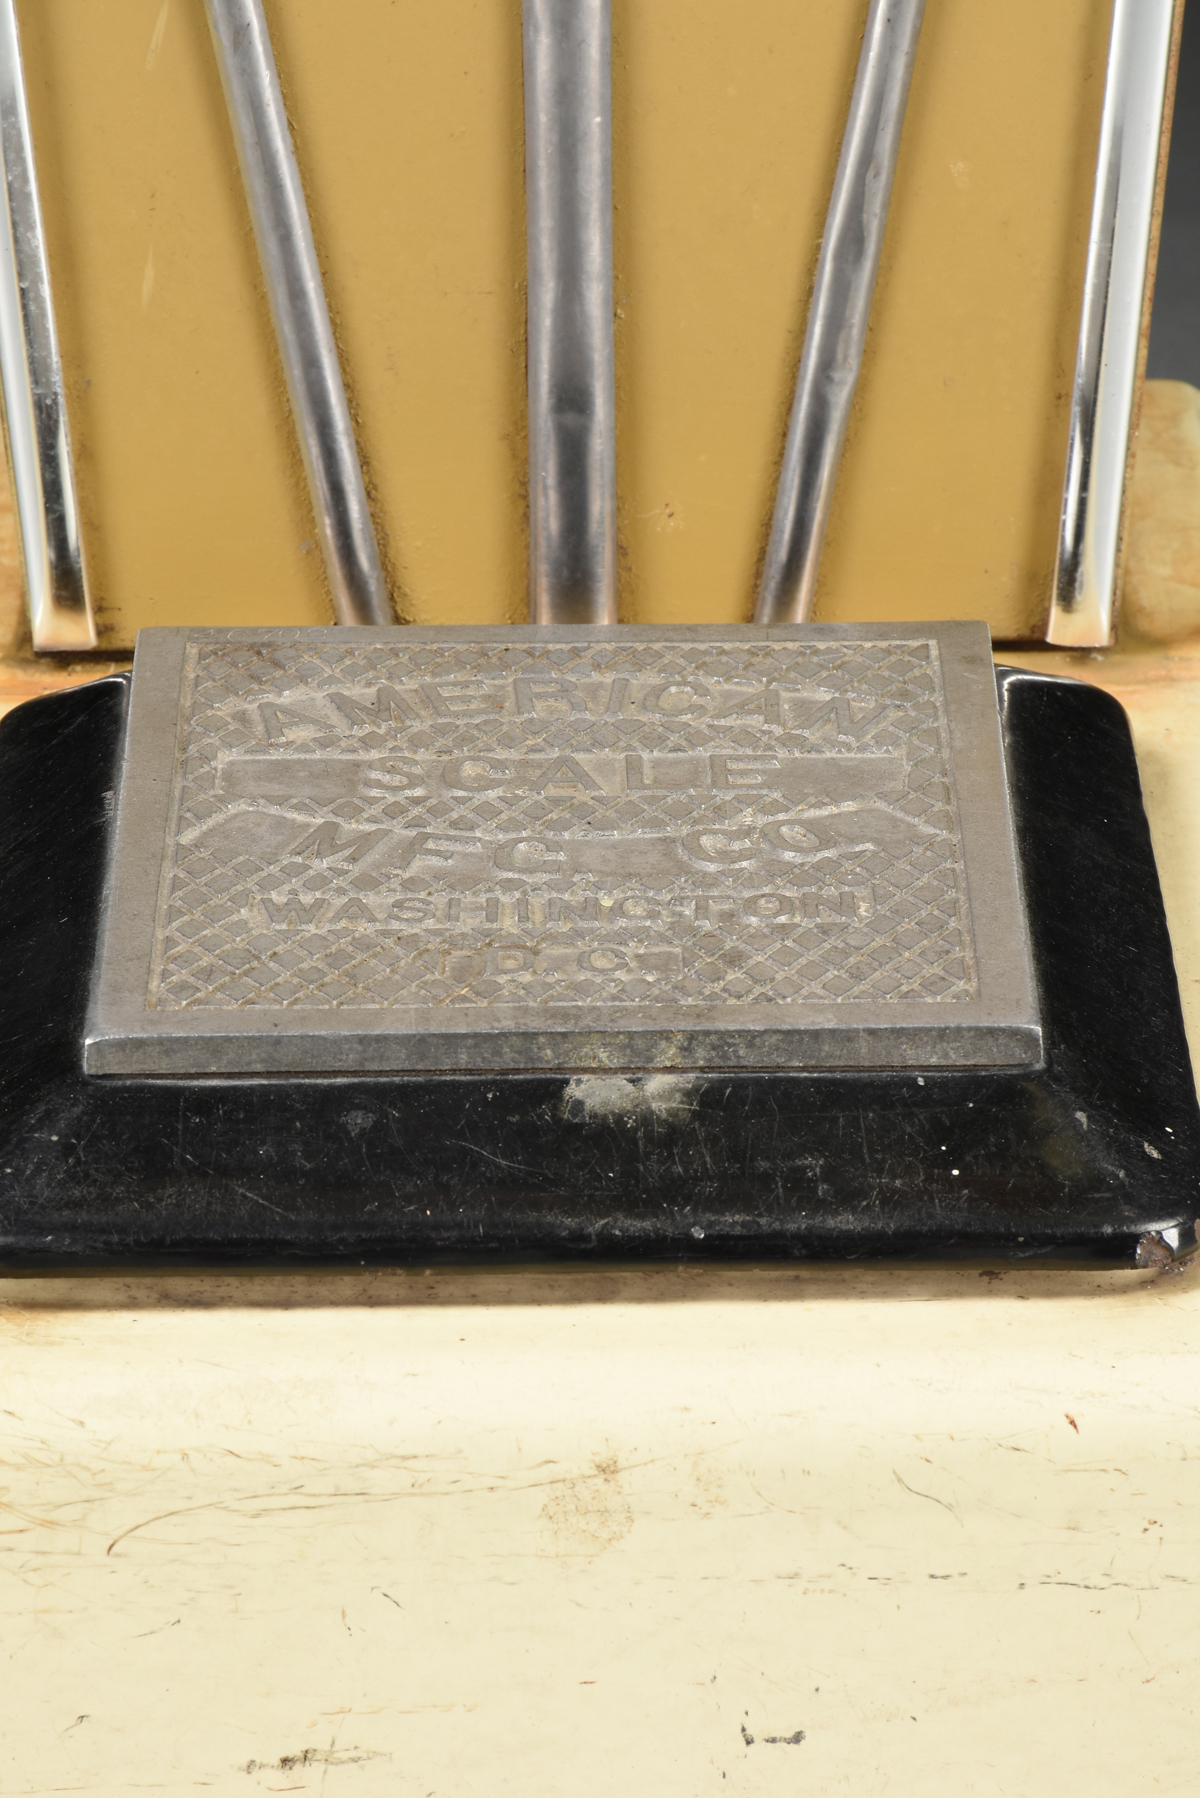 AN AMERICAN SCALE MANUFACTURING CO. FORTUNE MODEL 300 "1¬¢ Weight-Horoscope & Weight 5¬¢," COIN - Image 4 of 9